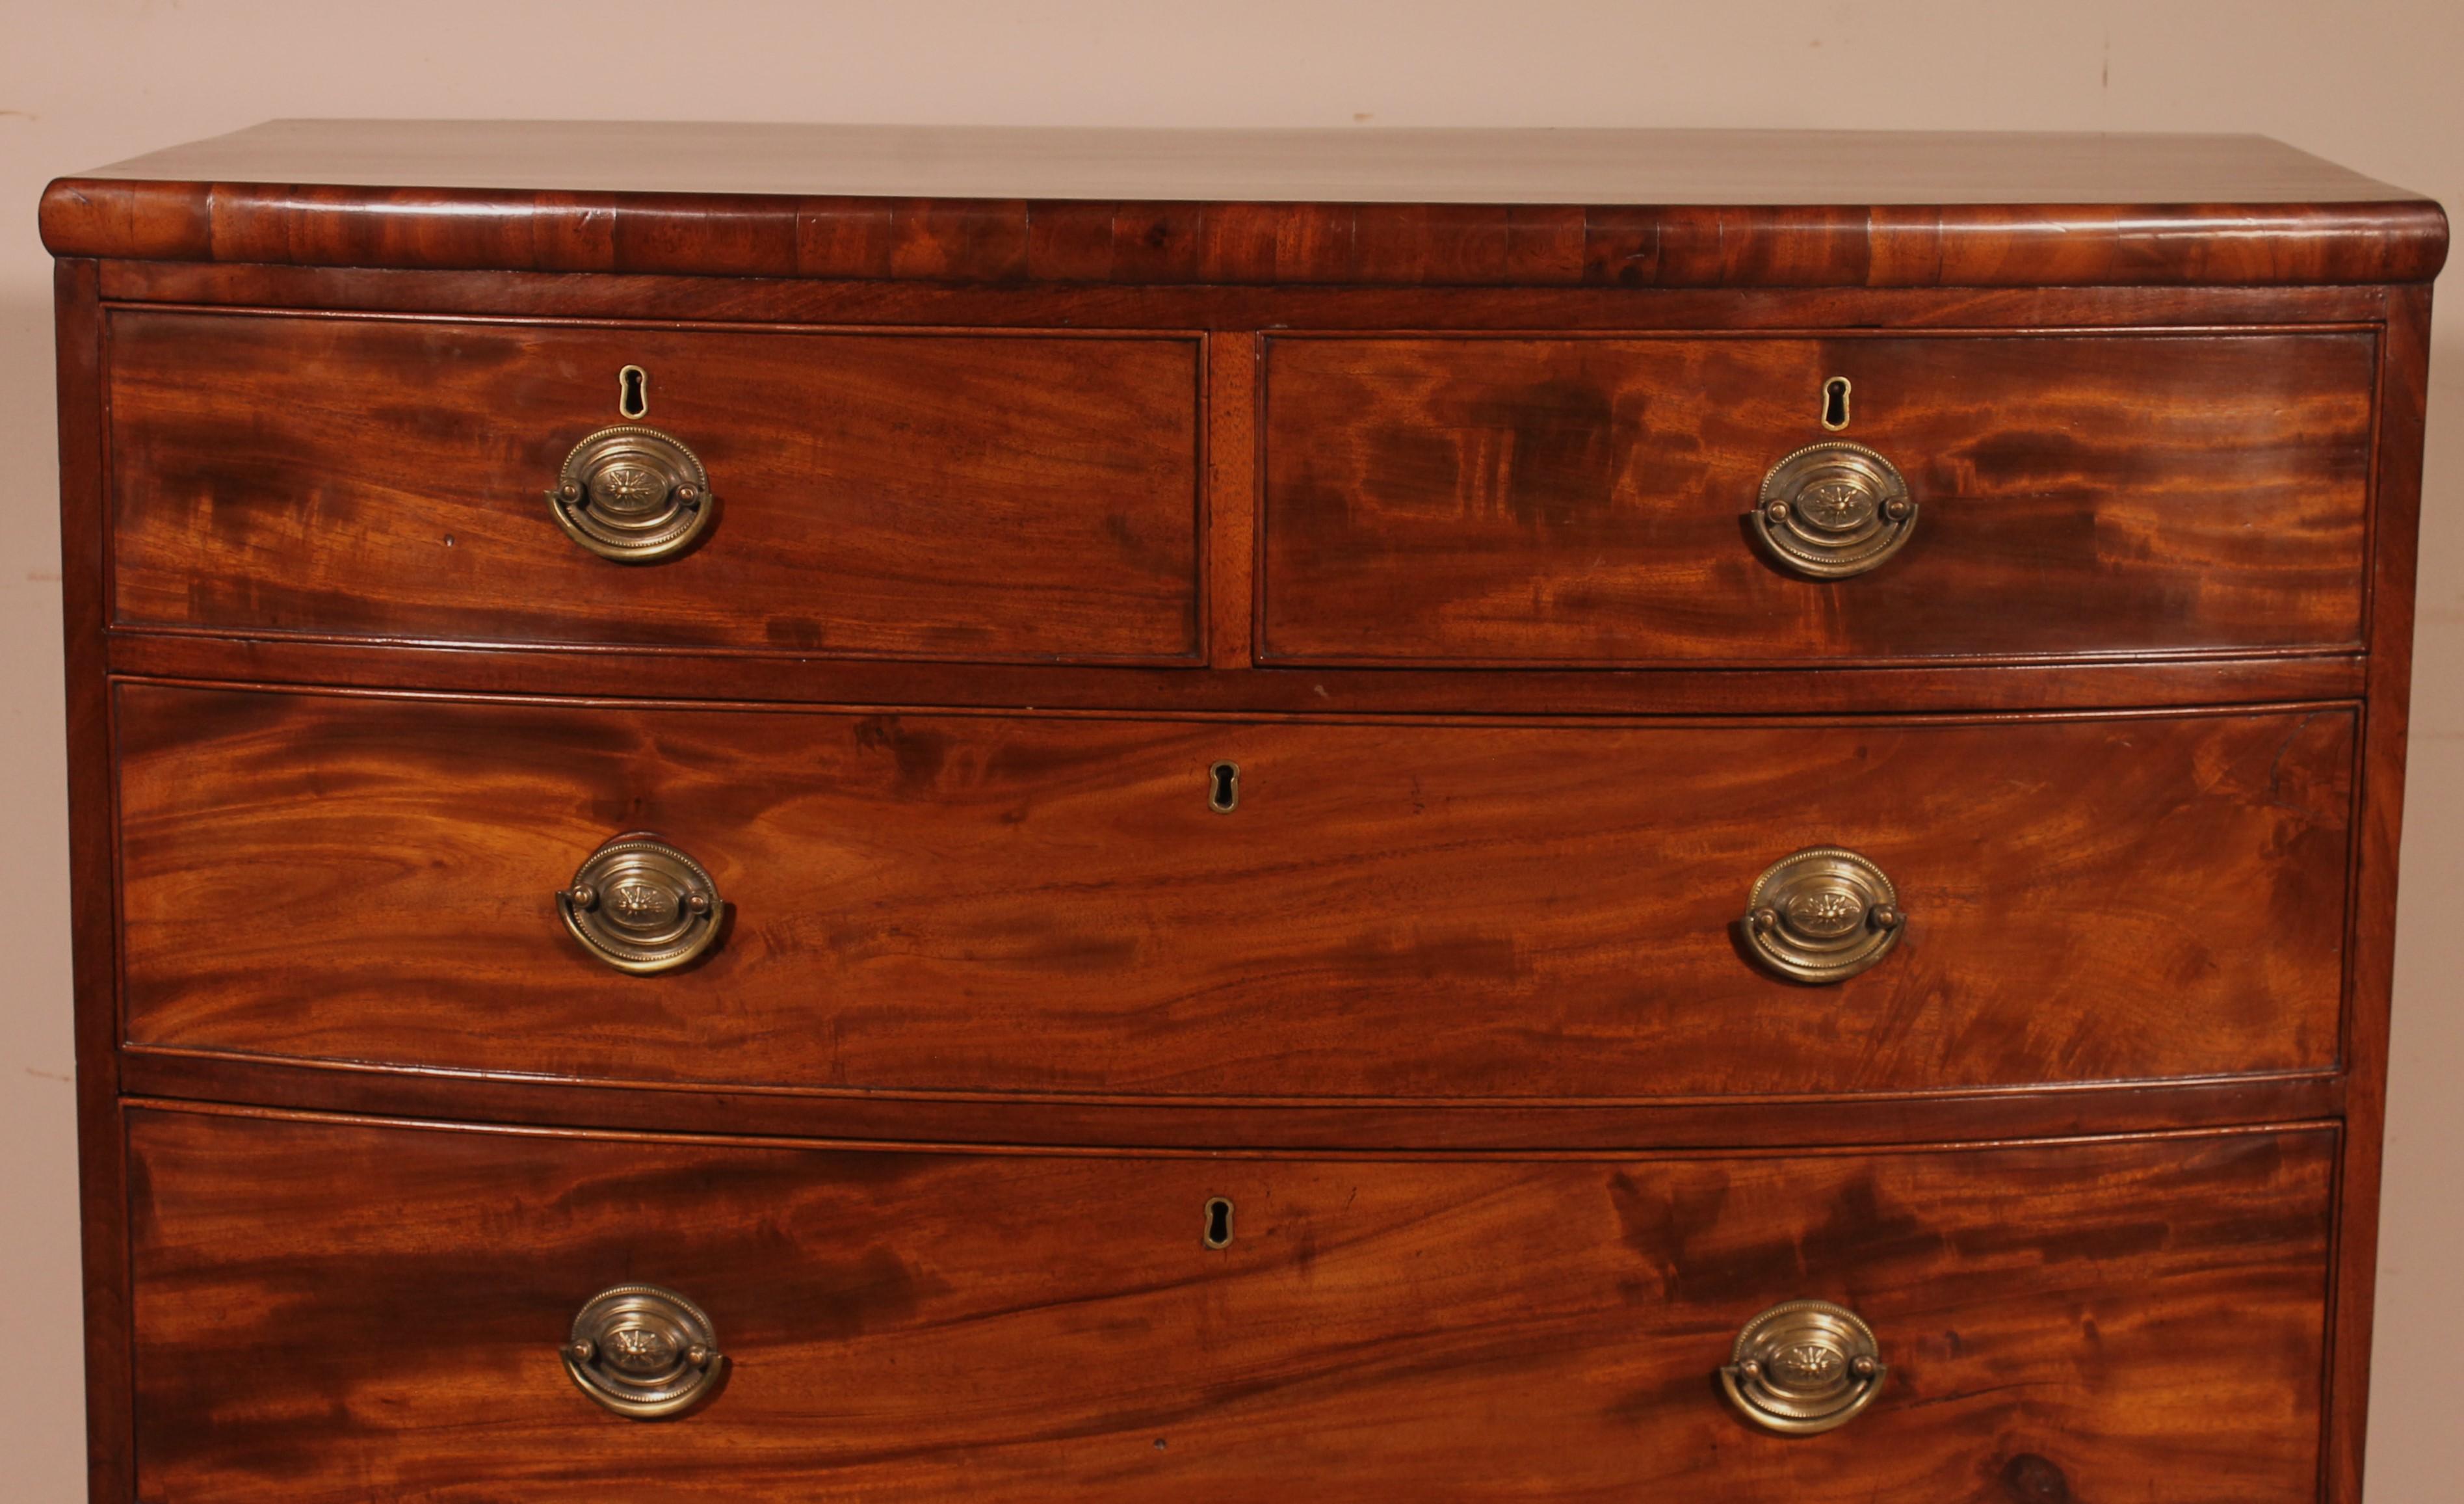 A fine bowfront chest of drawers in mahogany from the beginning of the 19th century - England.

Very beautiful chest of drawers composed of five drawers.
The drawers are curved which gives it a beautiful line and was at the time a sign of quality